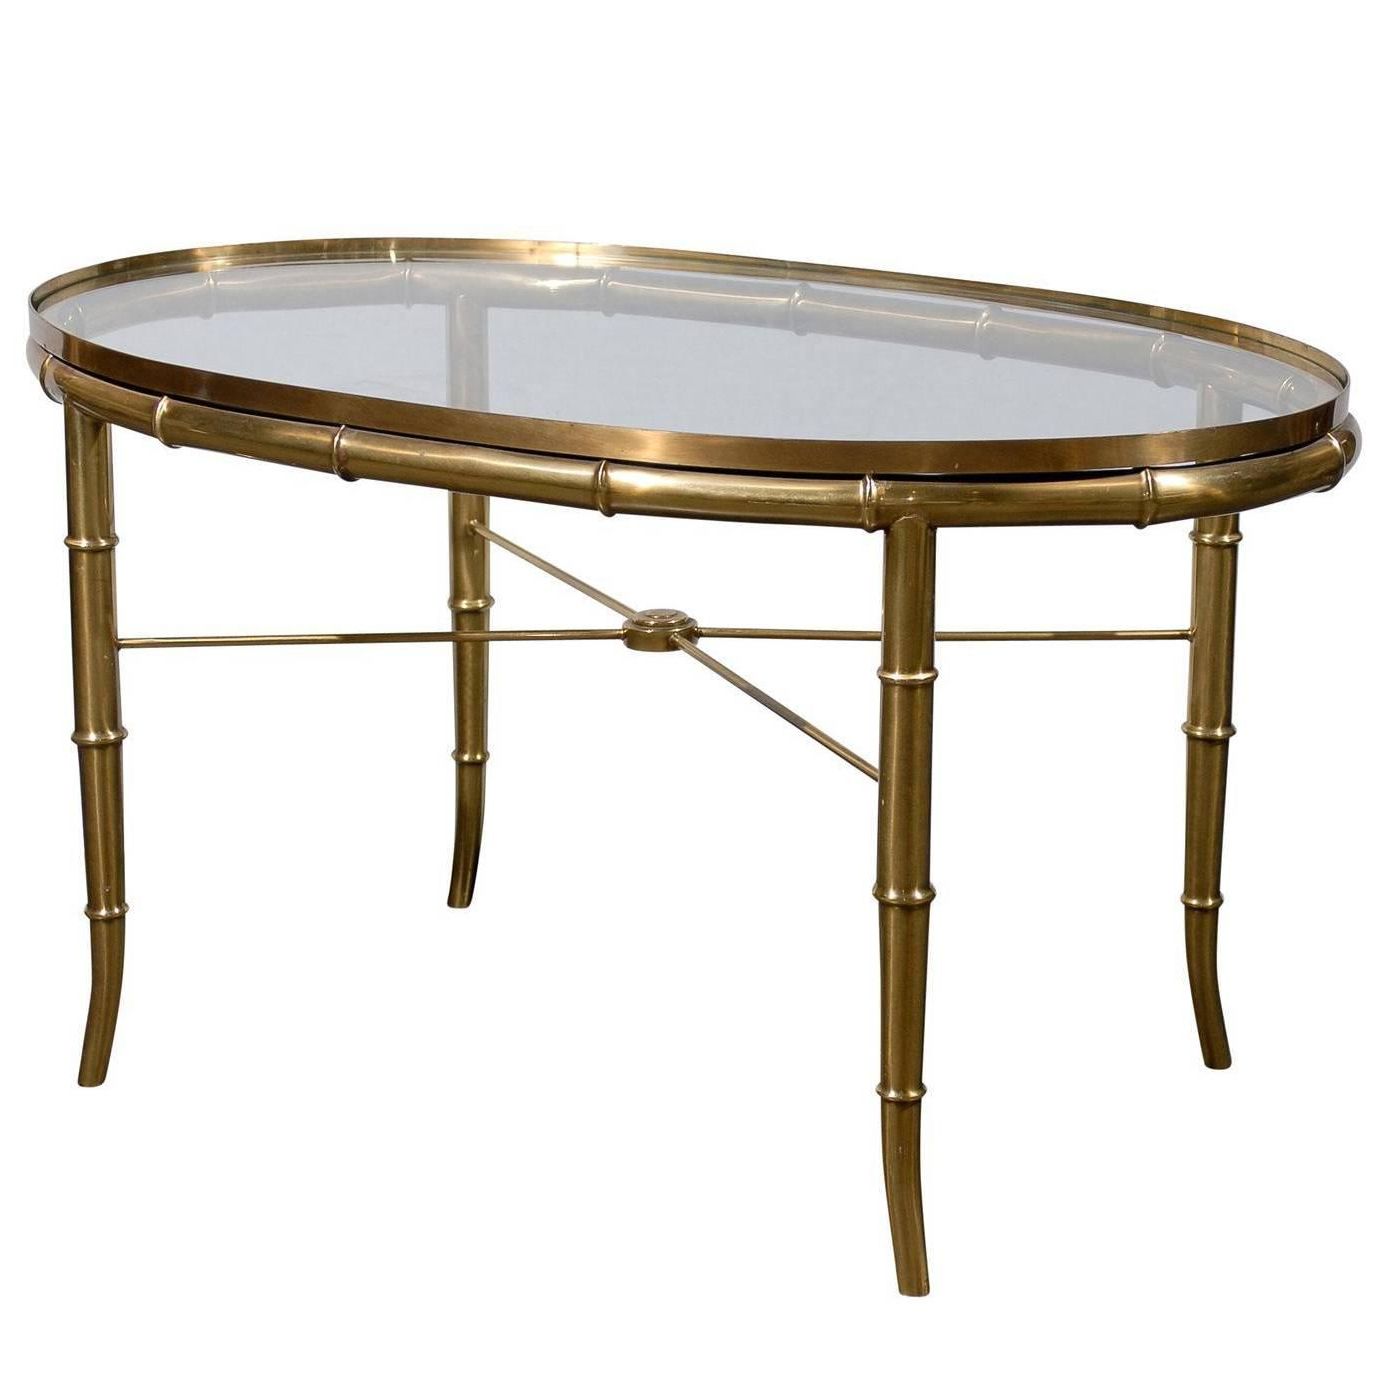 Oval Brass Glass Top Cocktail Or Coffee Table At 1stdibs Inside Fashionable Glass And Gold Oval Coffee Tables (View 5 of 10)